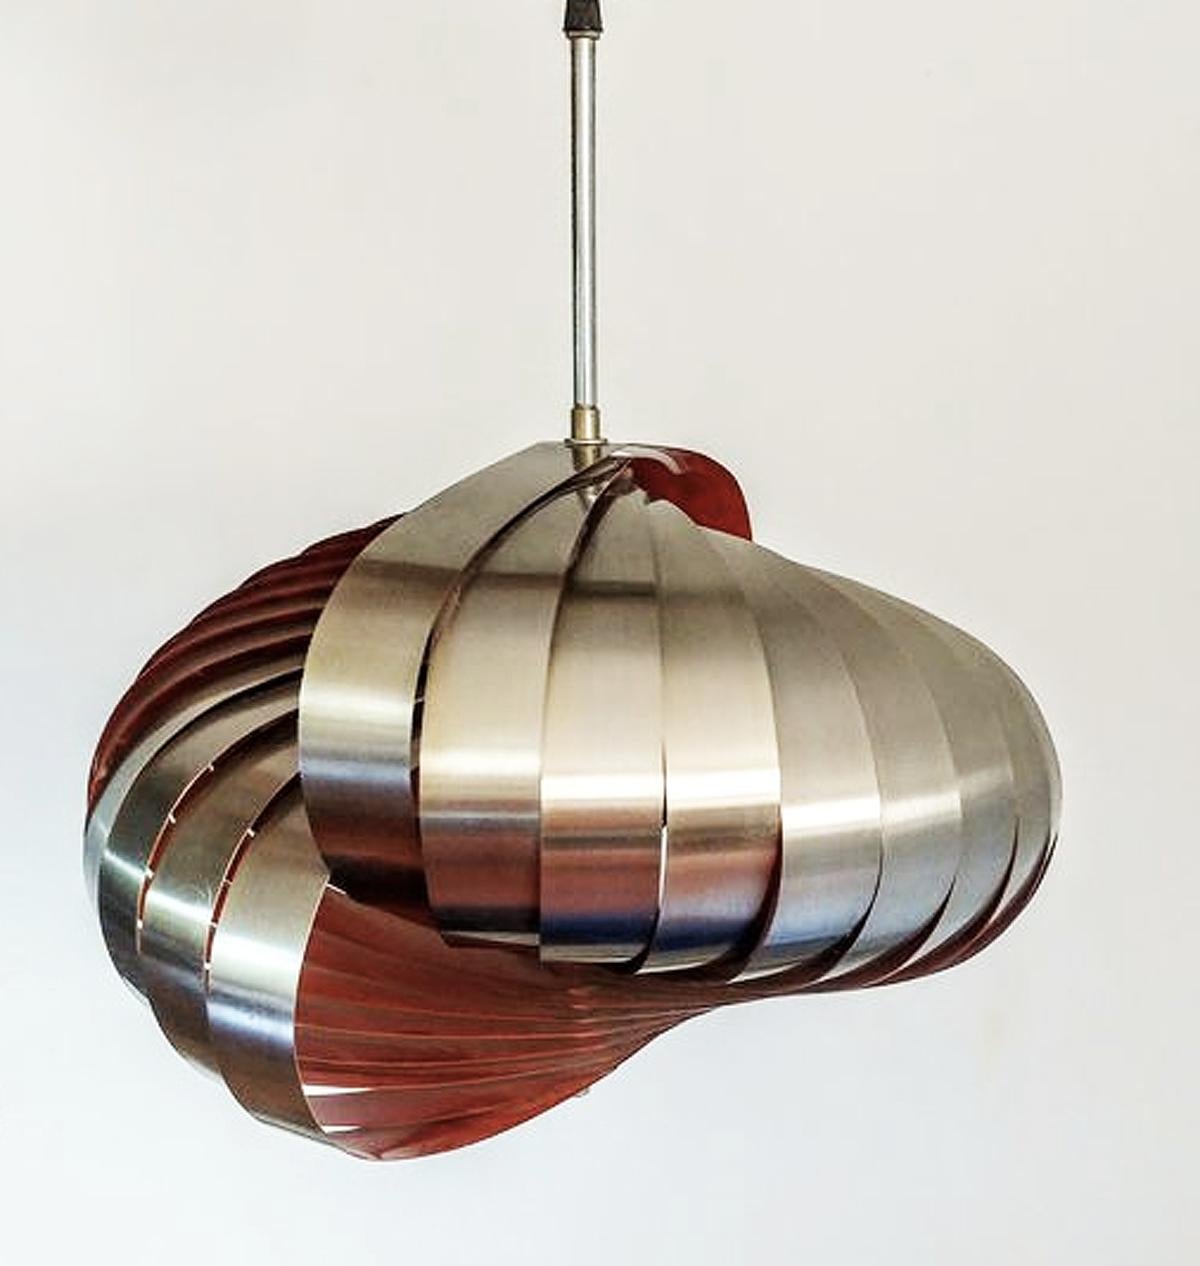 Stainless steel pendant light by Henri Mathieu. France 1970s. Great lines and design a very modern design even now. Silver steel on the outside, and orange on the inside. Giving a beautiful glow when on. 
The lamp uses x 2 E27 lamp bulbs... in good